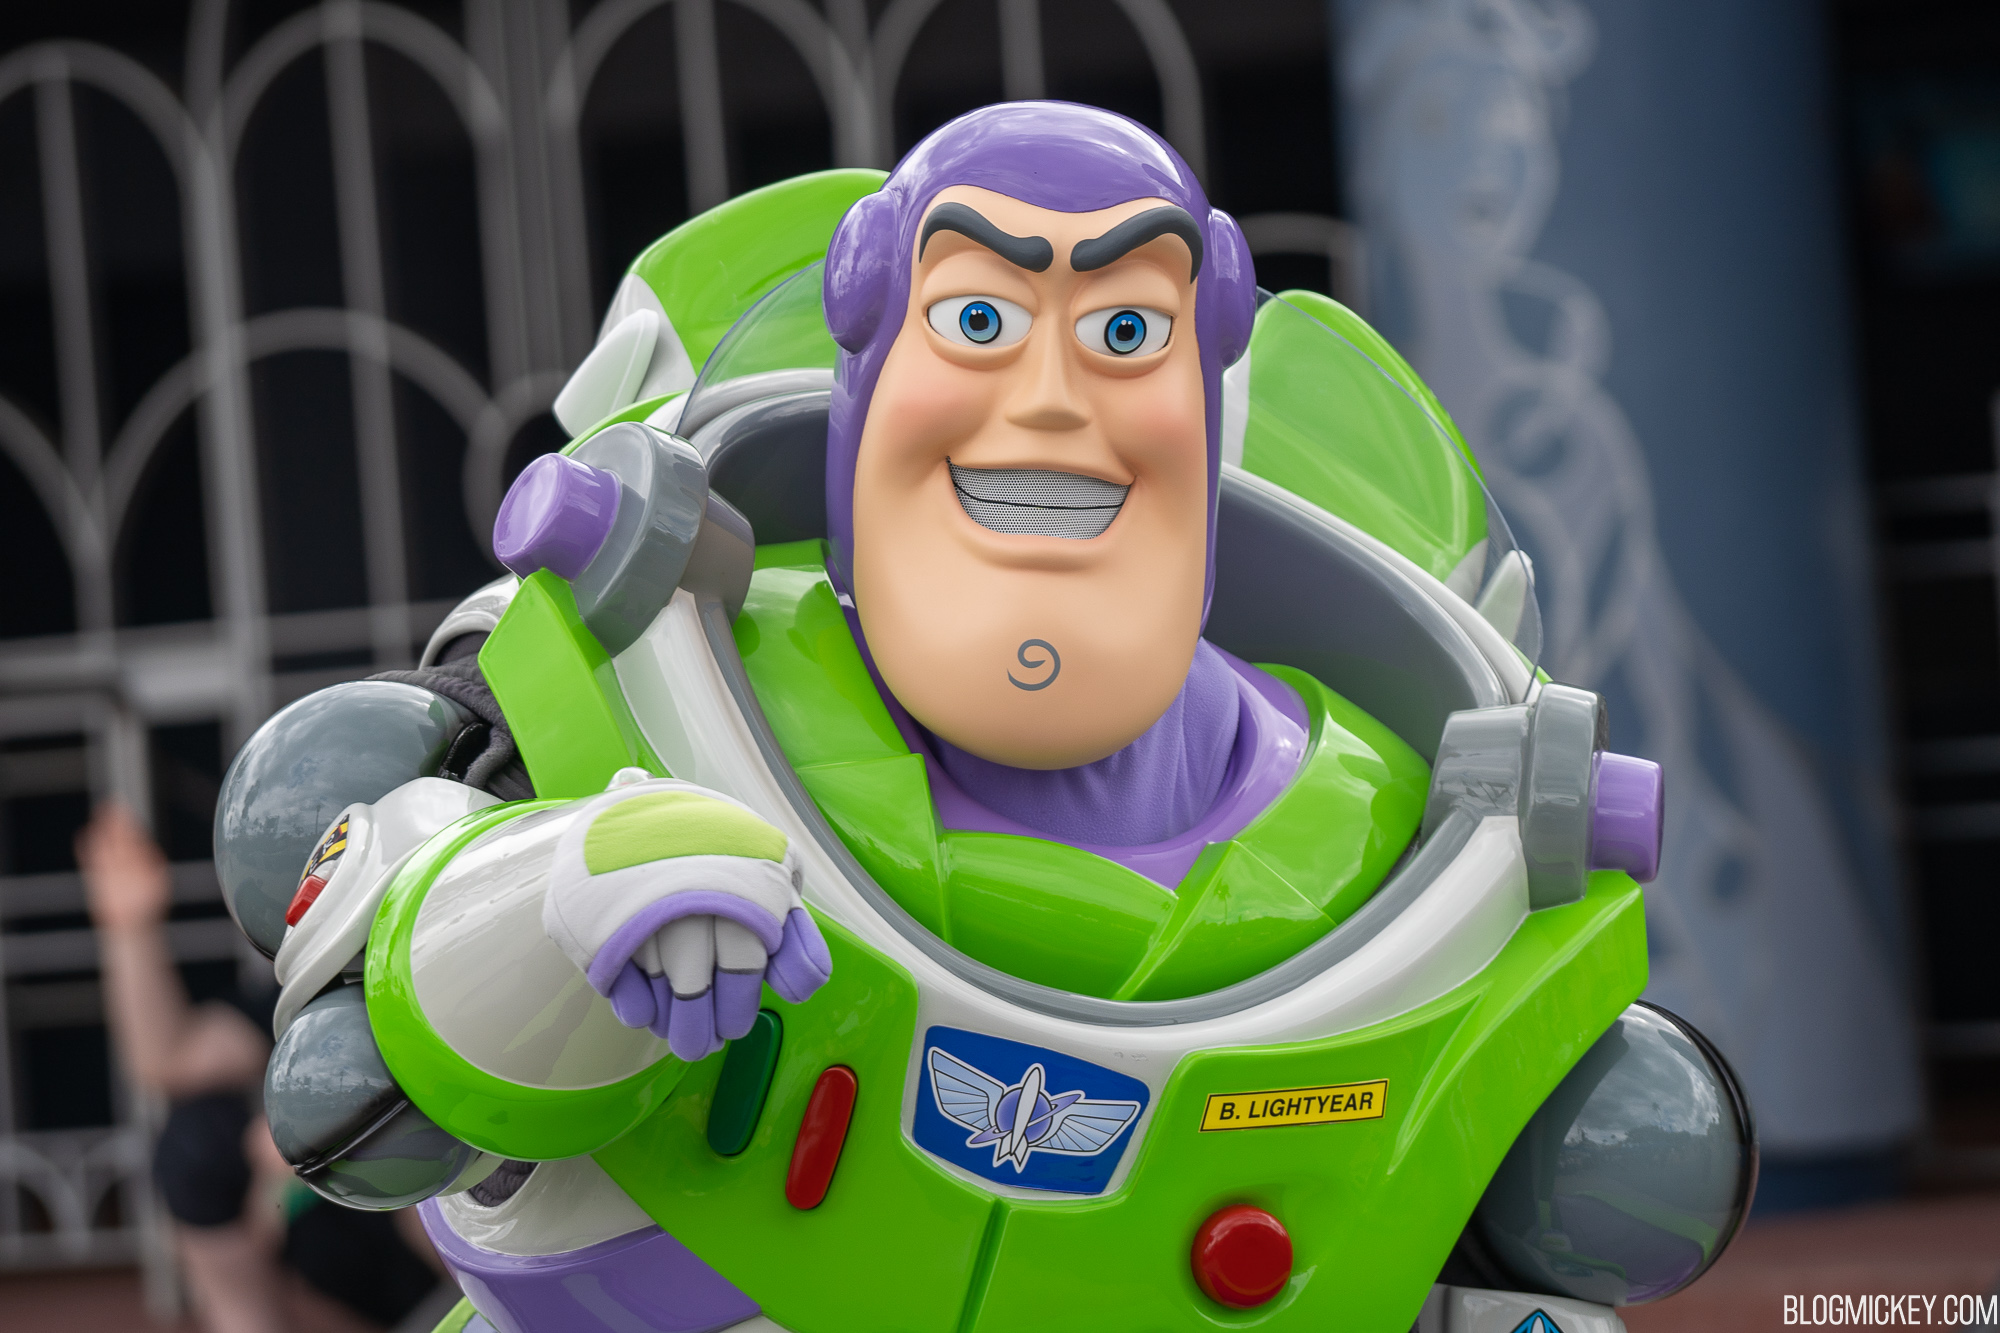 Buzz Lightyear Debuts New Character Look at Disney World